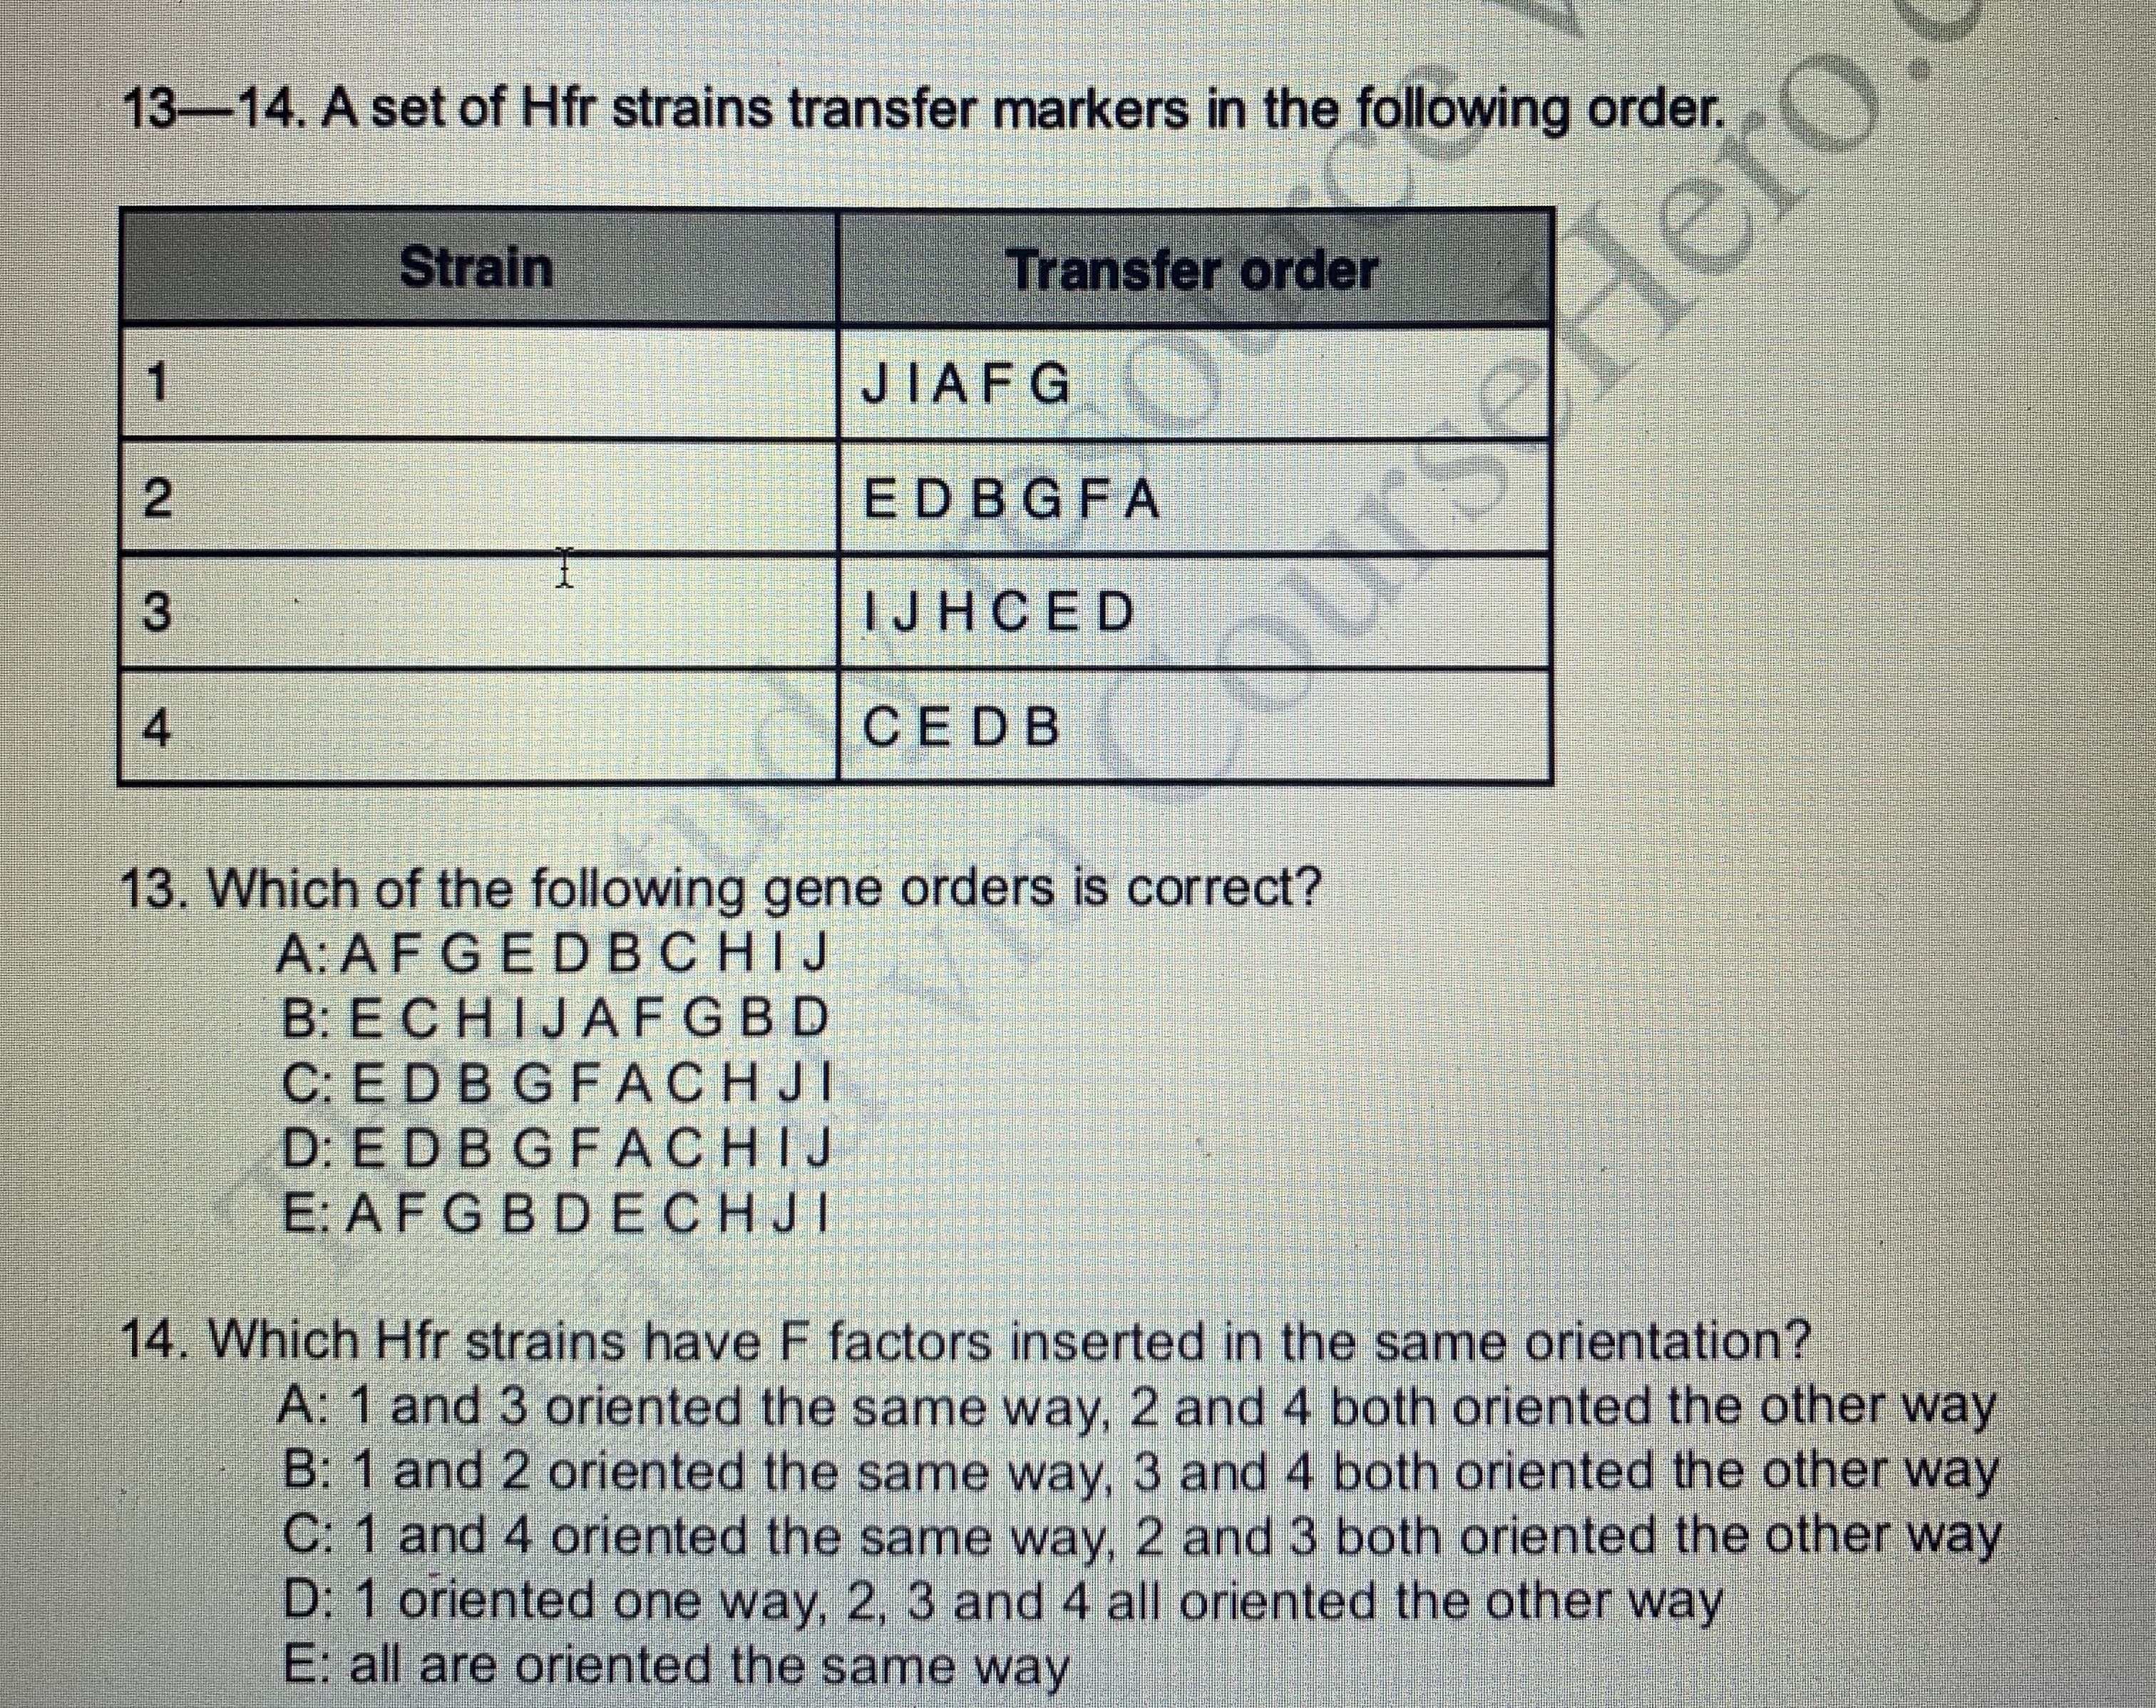 13-14. A set of Hfr strains transfer markers in the following order.
Strain
Transfer order
JIAF G
1
ED BGFA
IJH CE D
CED B
13. Which of the following gene orders is correct?
A: AFGEDBCHIJ
B: ECHIJAFGBD
C: E D B G FACH JI
D: E D B G FACHIJ
E: A F G BD ECHJI
14. Which Hfr strains have F factors inserted in the same orientation?
A: 1 and 3 oriented the same way, 2 and 4 both oriented the other way
B: 1 and 2 oriented the same way, 3 and 4 both oriented the other way
C: 1 and 4 oriented the same way, 2 and 3 both oriented the other way
D: 1 oriented one way, 2, 3 and 4 all oriented the other way
E: all are oriented the same way
2
UYSerlero
